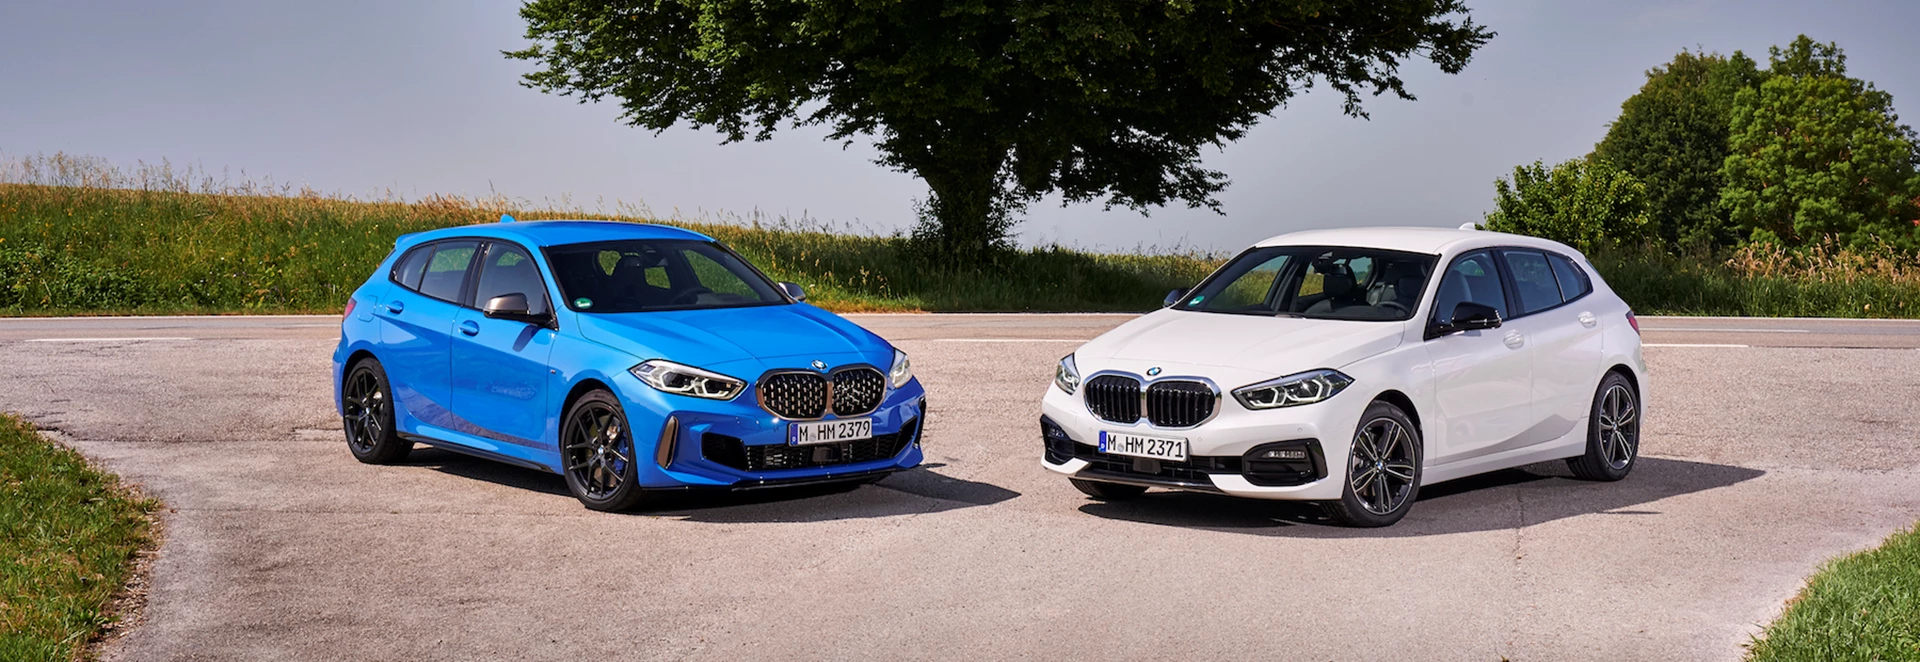 BMW 1 Series - What’s new? 